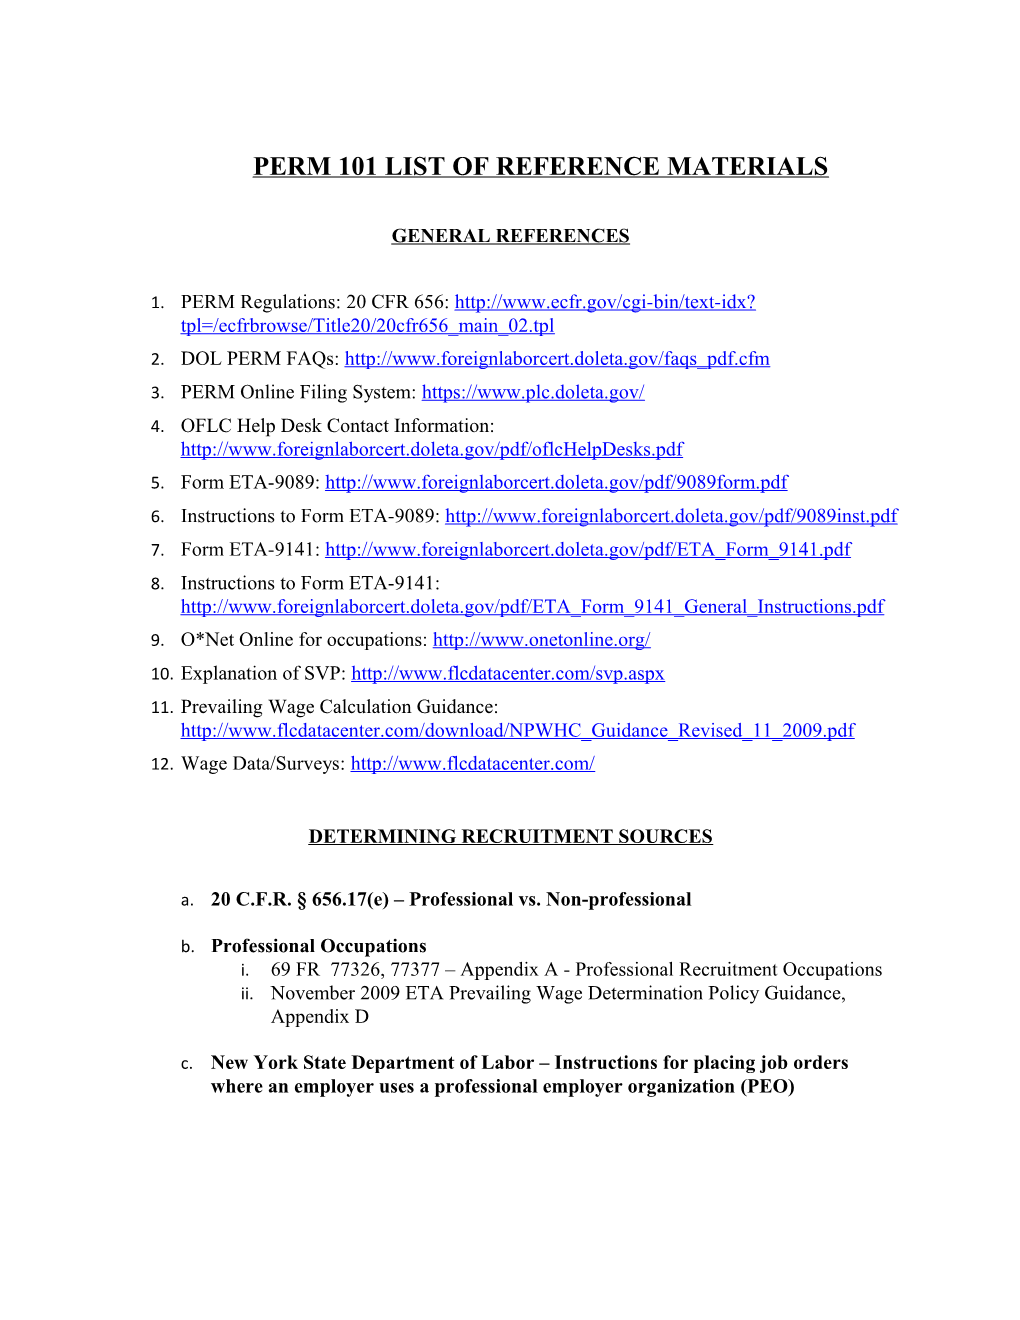 Perm 101 List of Reference Materials